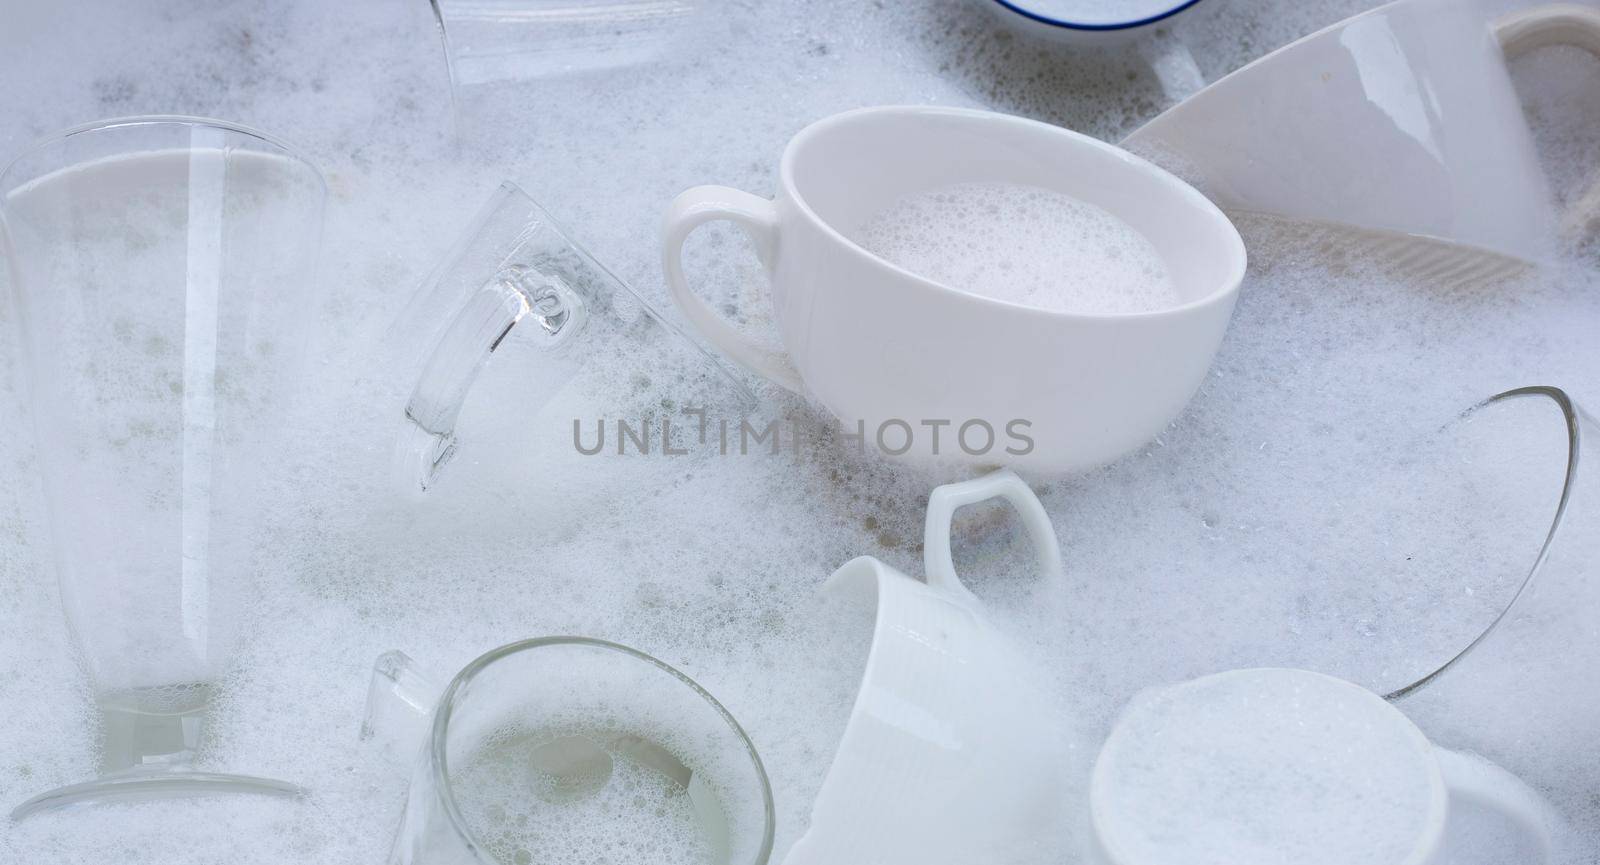 Washing used drinking glasses and cups